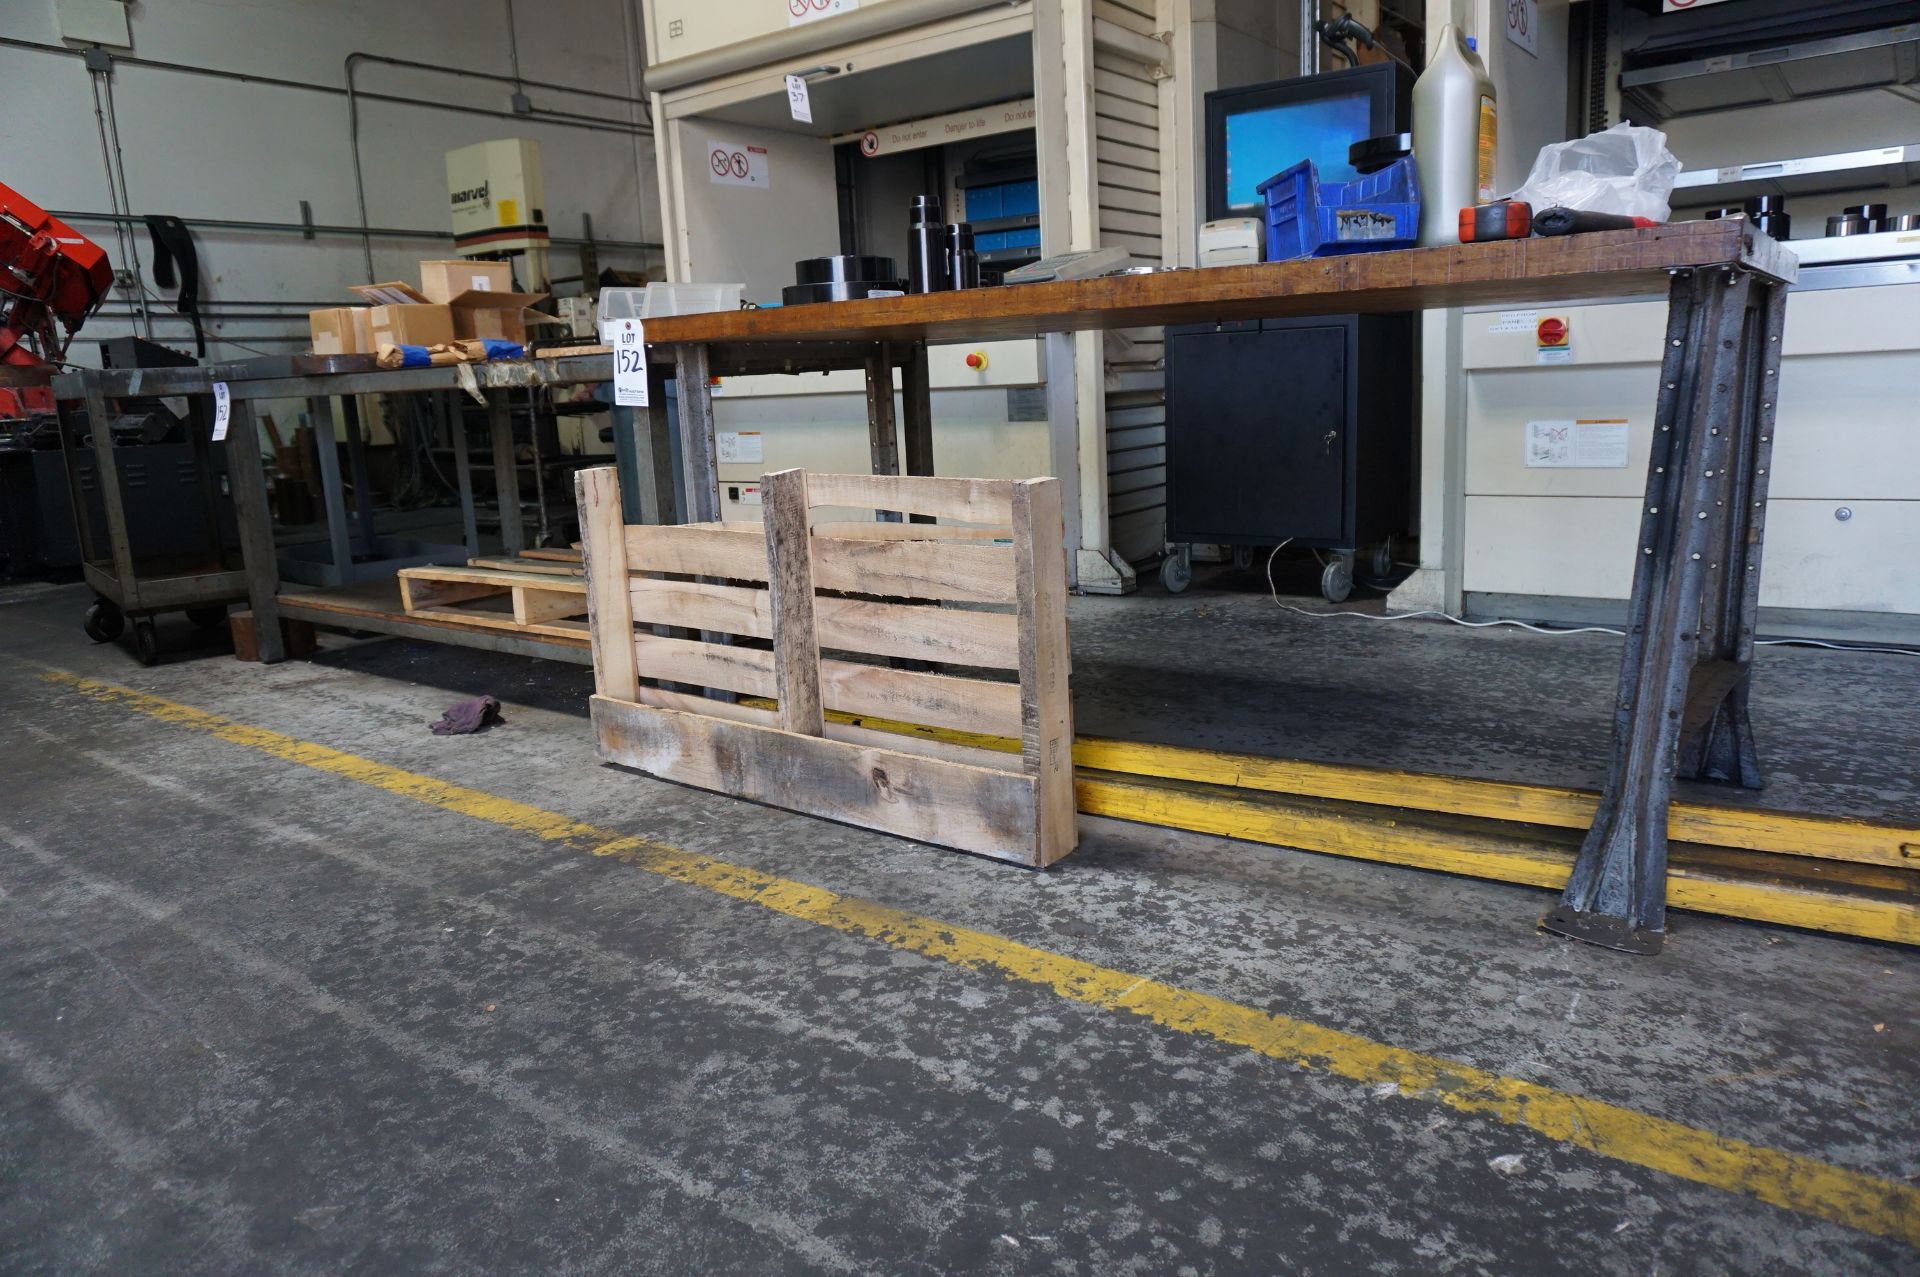 SUPPORT LOT NEAR VERTICAL MODULES TO INCLUDE: (3) WORKBENCHES STEEL LEGS, (3) STEEL CARTS, (1) SMALL